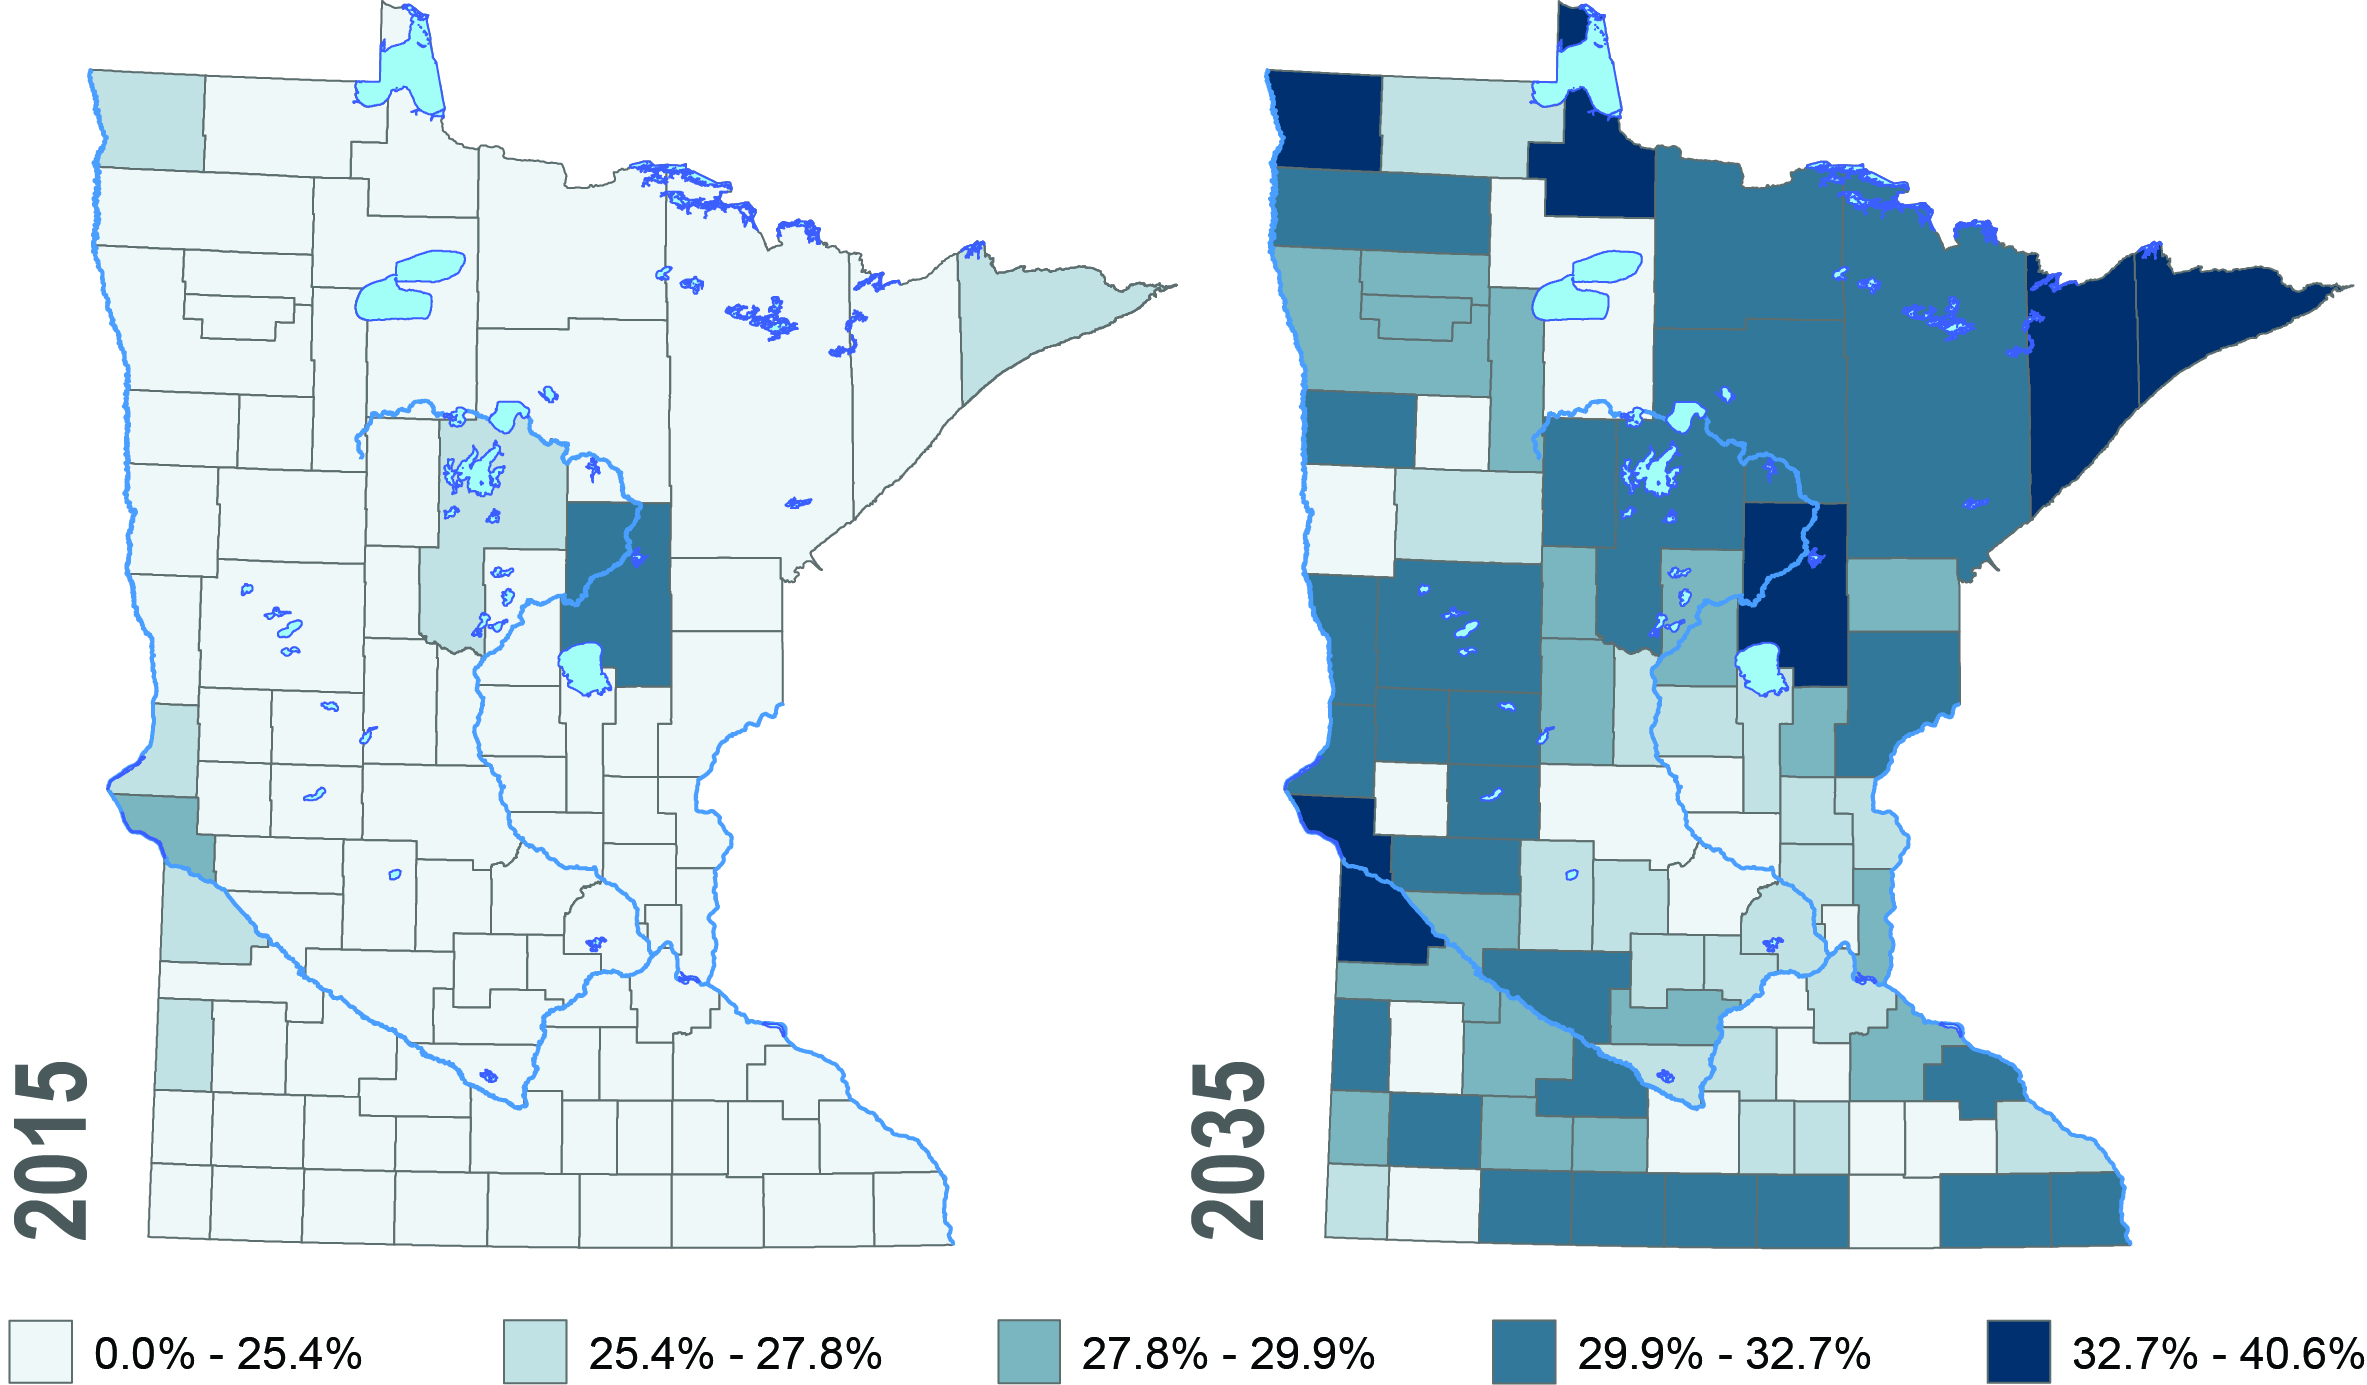 Figure 3-1: Percentage of county residents over the age of 65